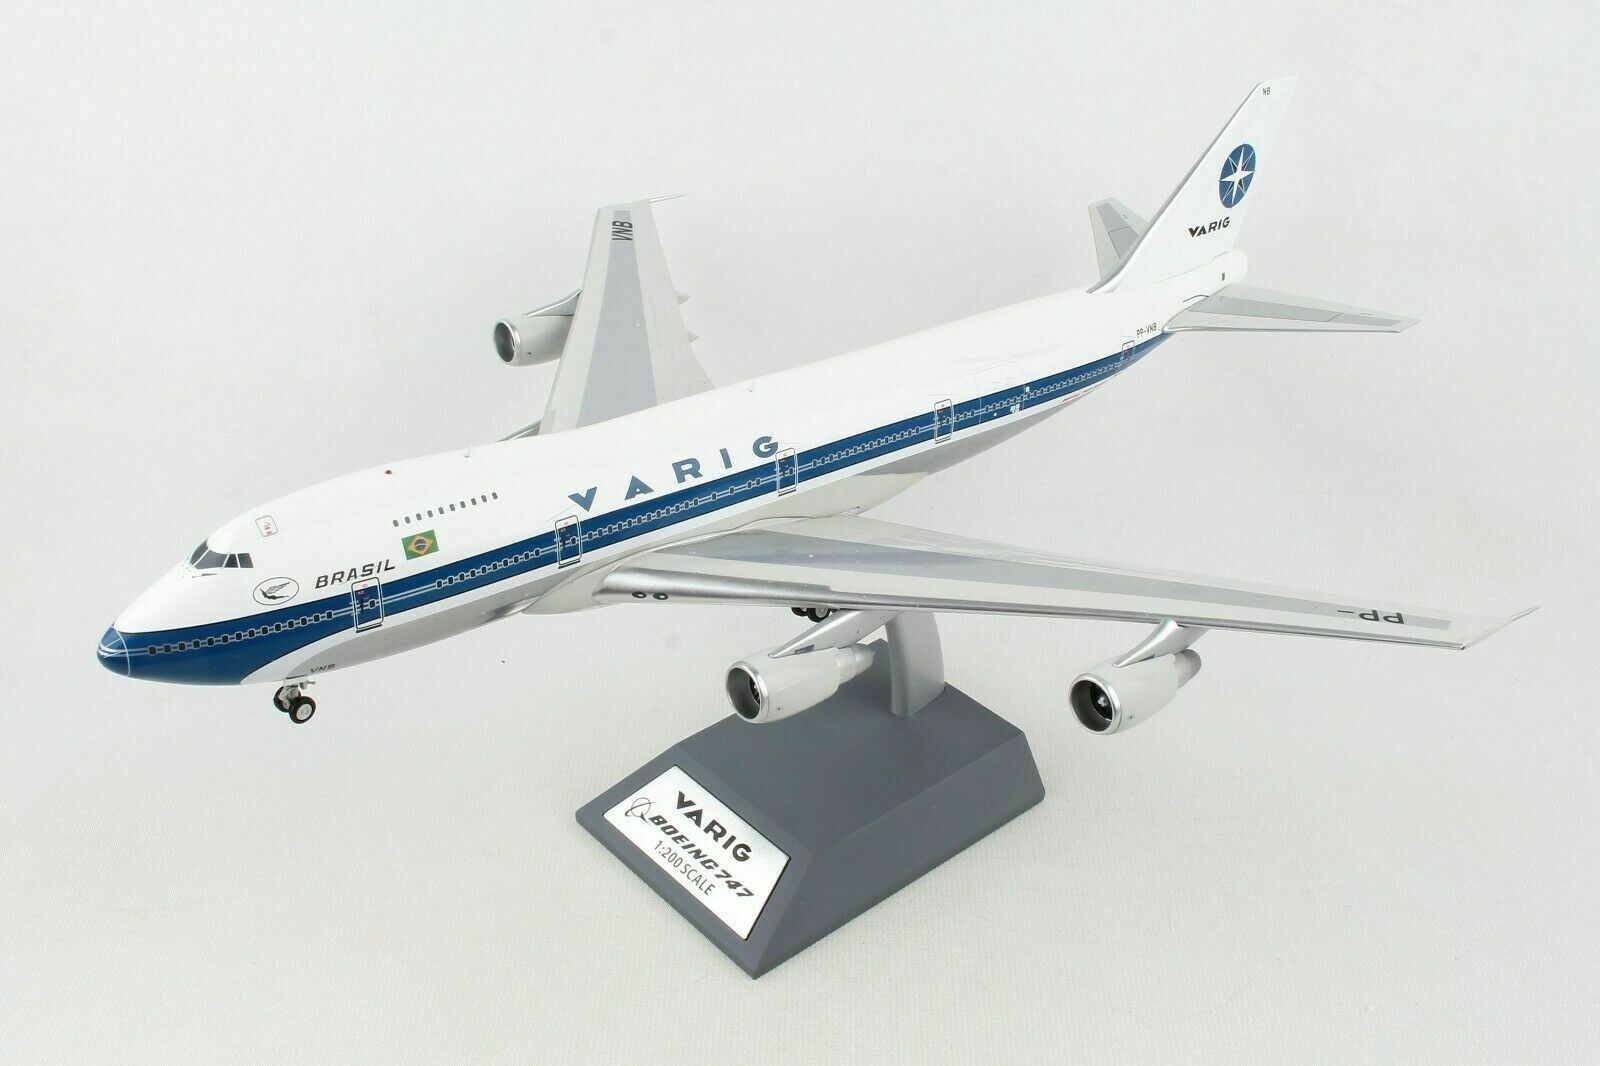 Boeing 747-200 Exclusive model of Classic suníes airways by inflight 200 OVP 1:200 